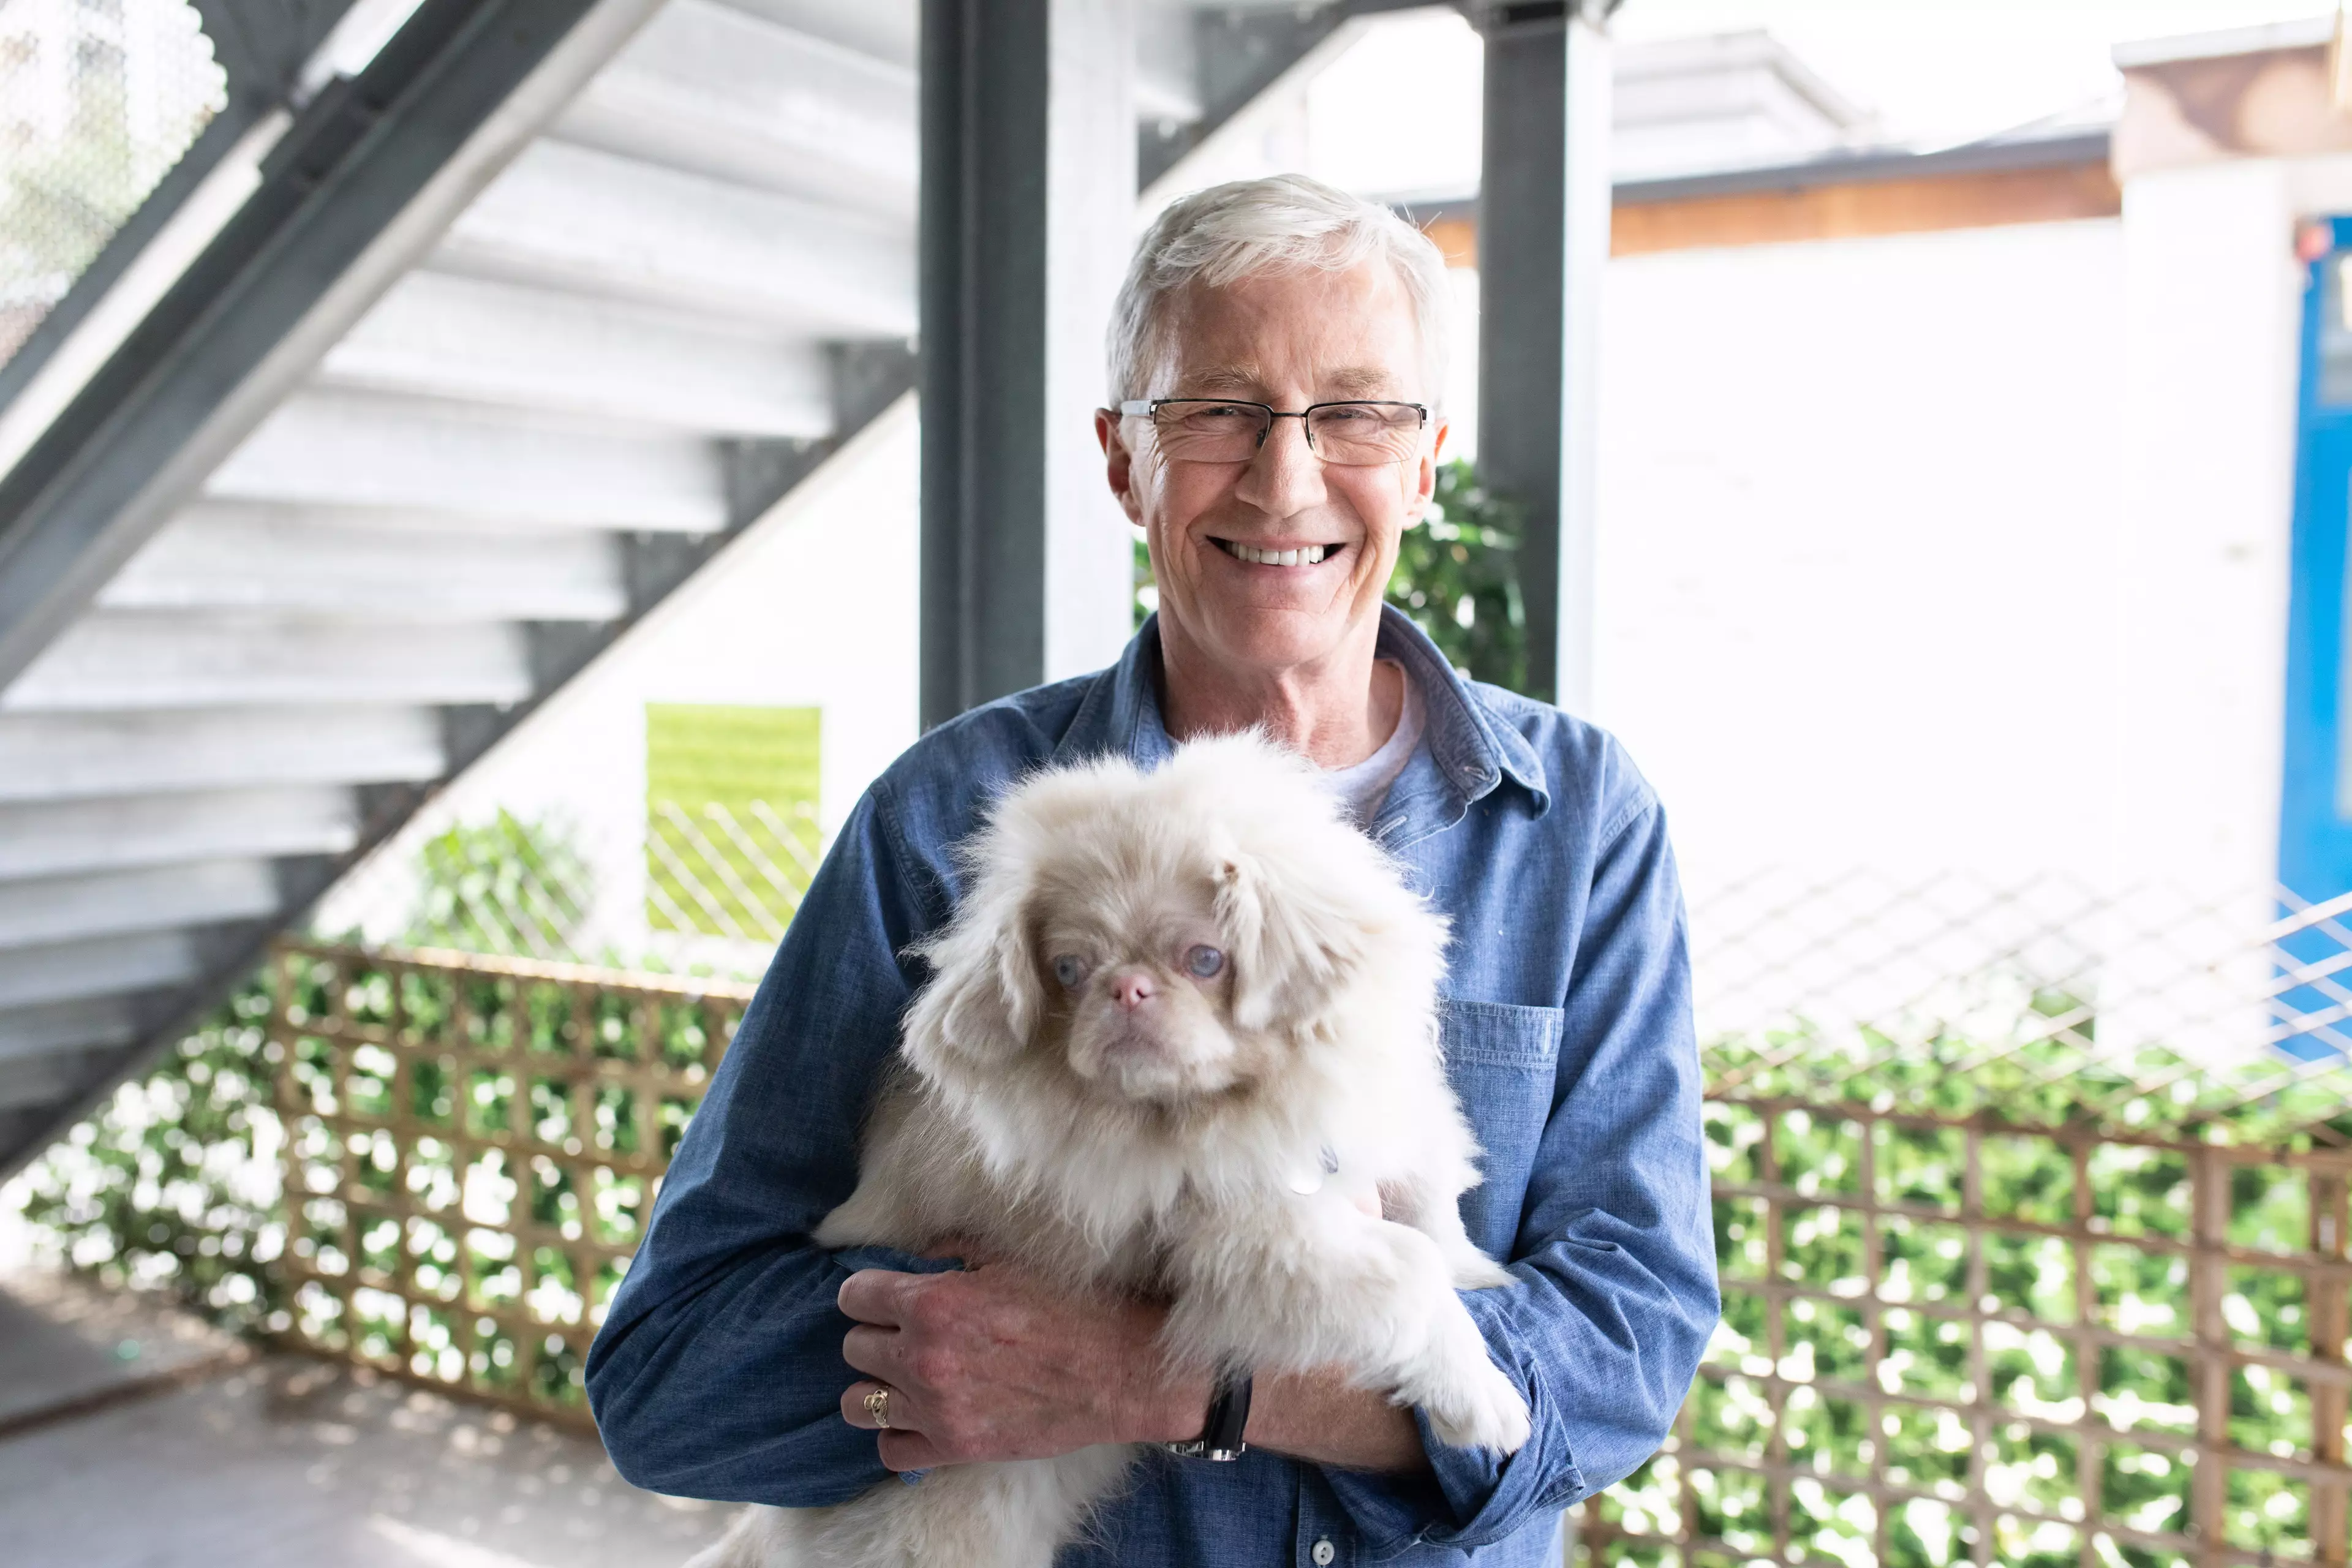 Boo proves that beauty is only skin deep on Wednesday's 'Paul O'Grady: For the Love of Dogs'. (